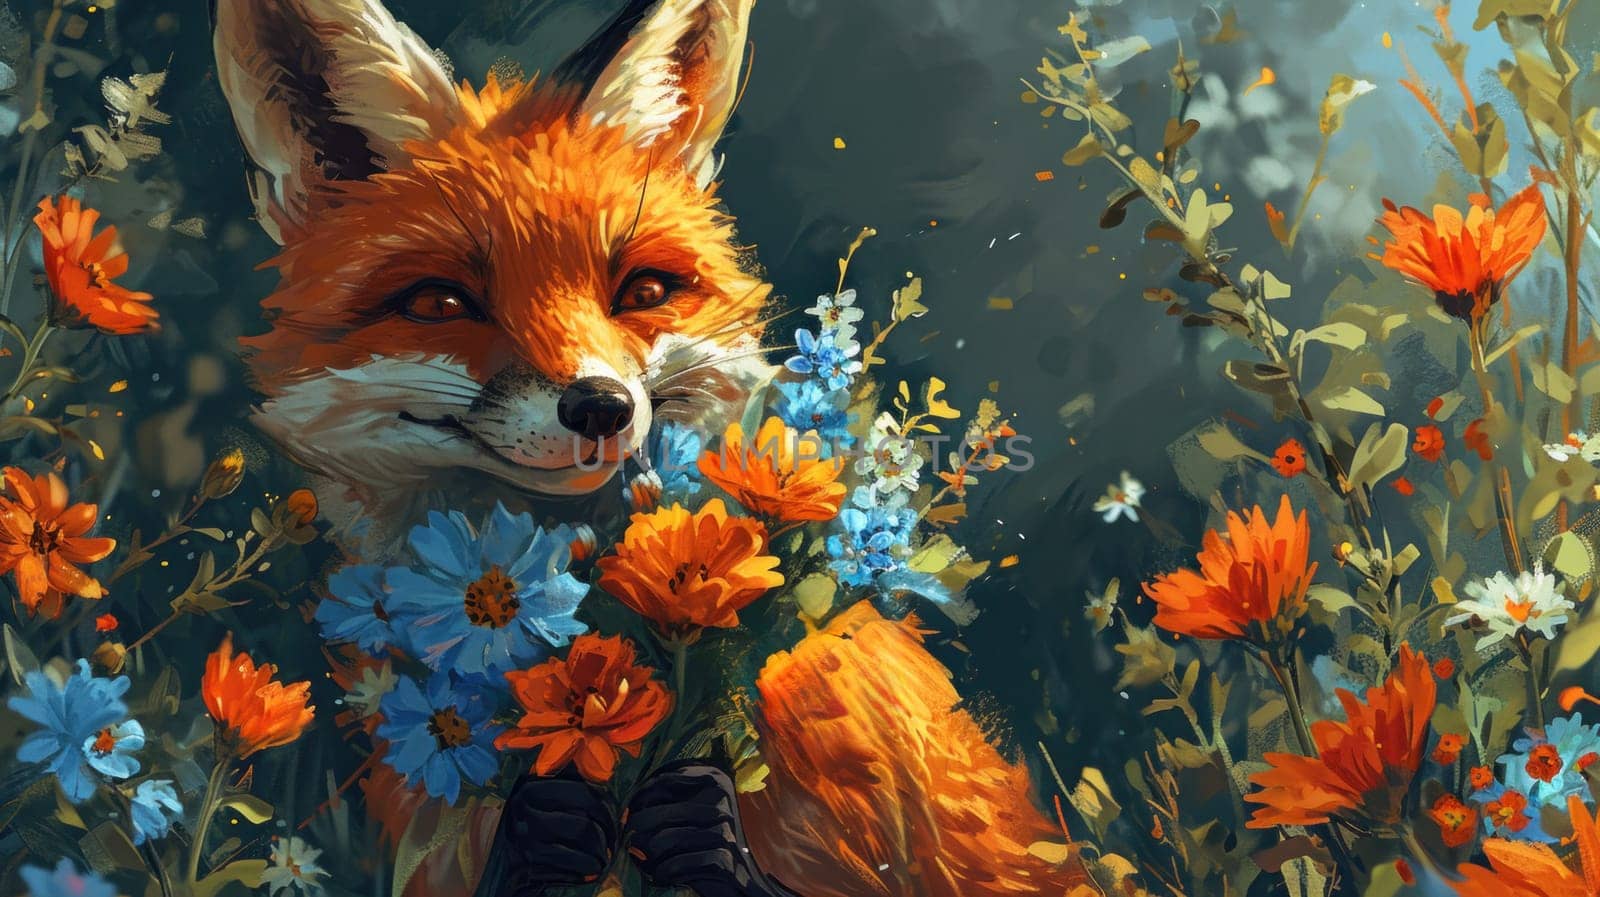 A painting of a fox with flowers in its mouth